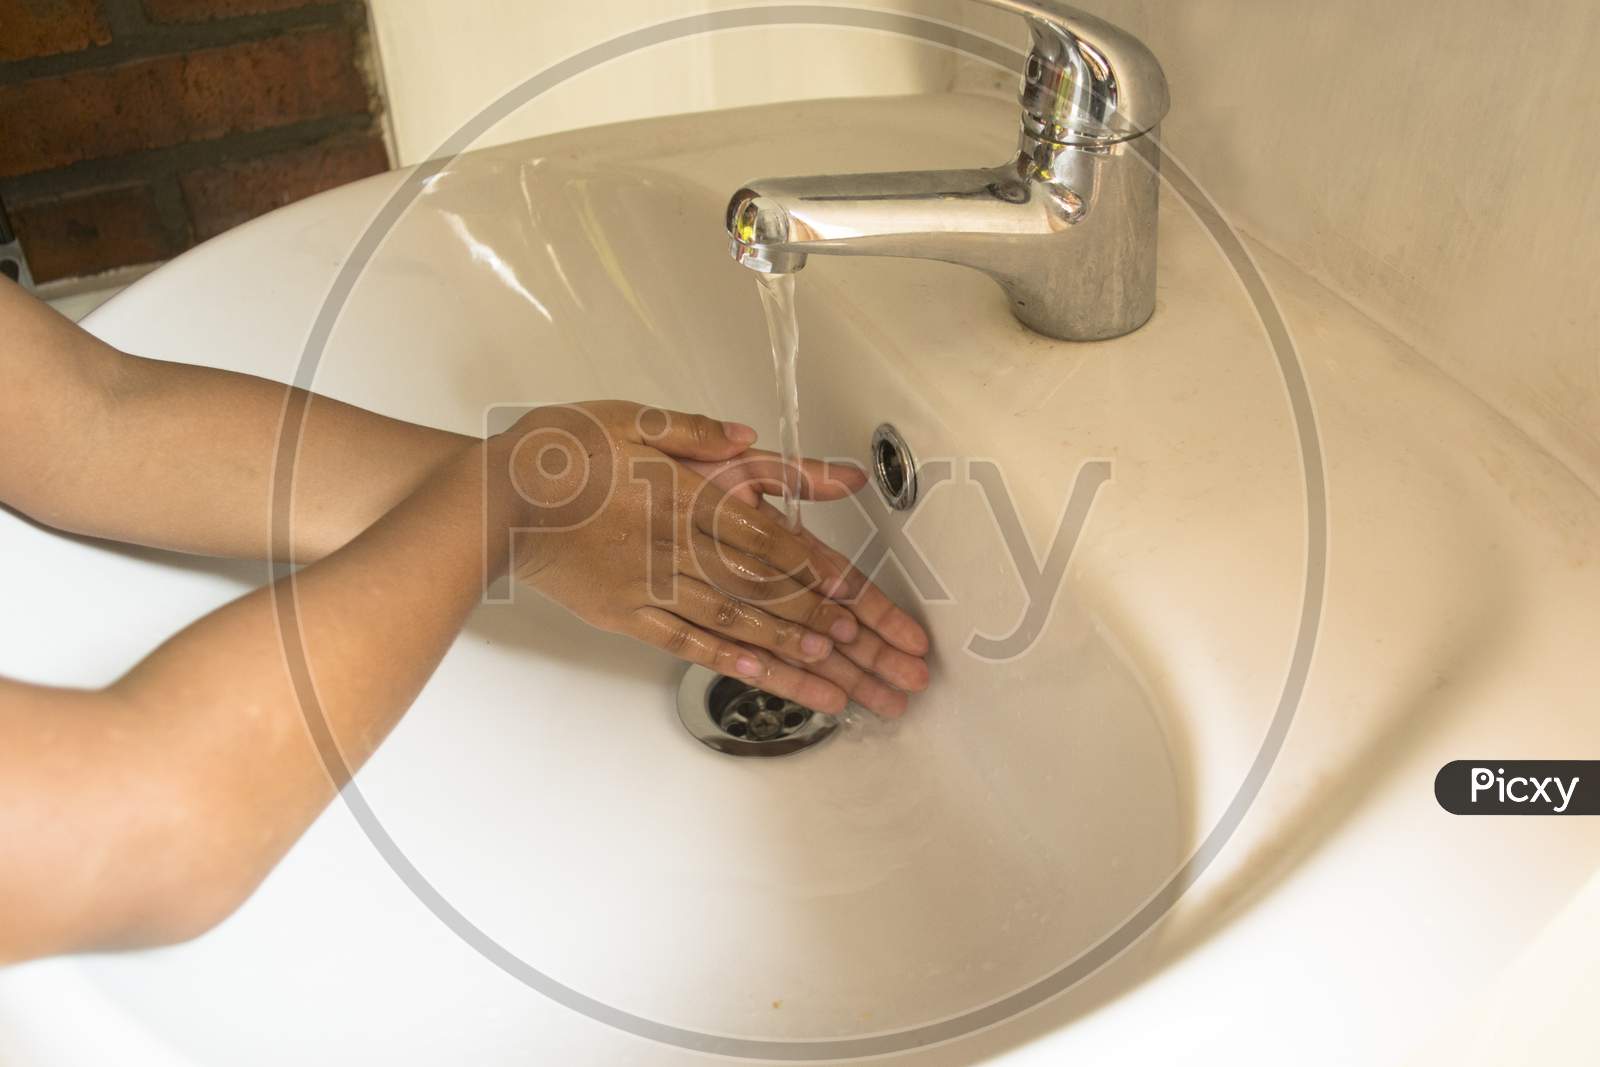 Wet Hands With Water Before Washing Hands With Hand Soap In The Sink